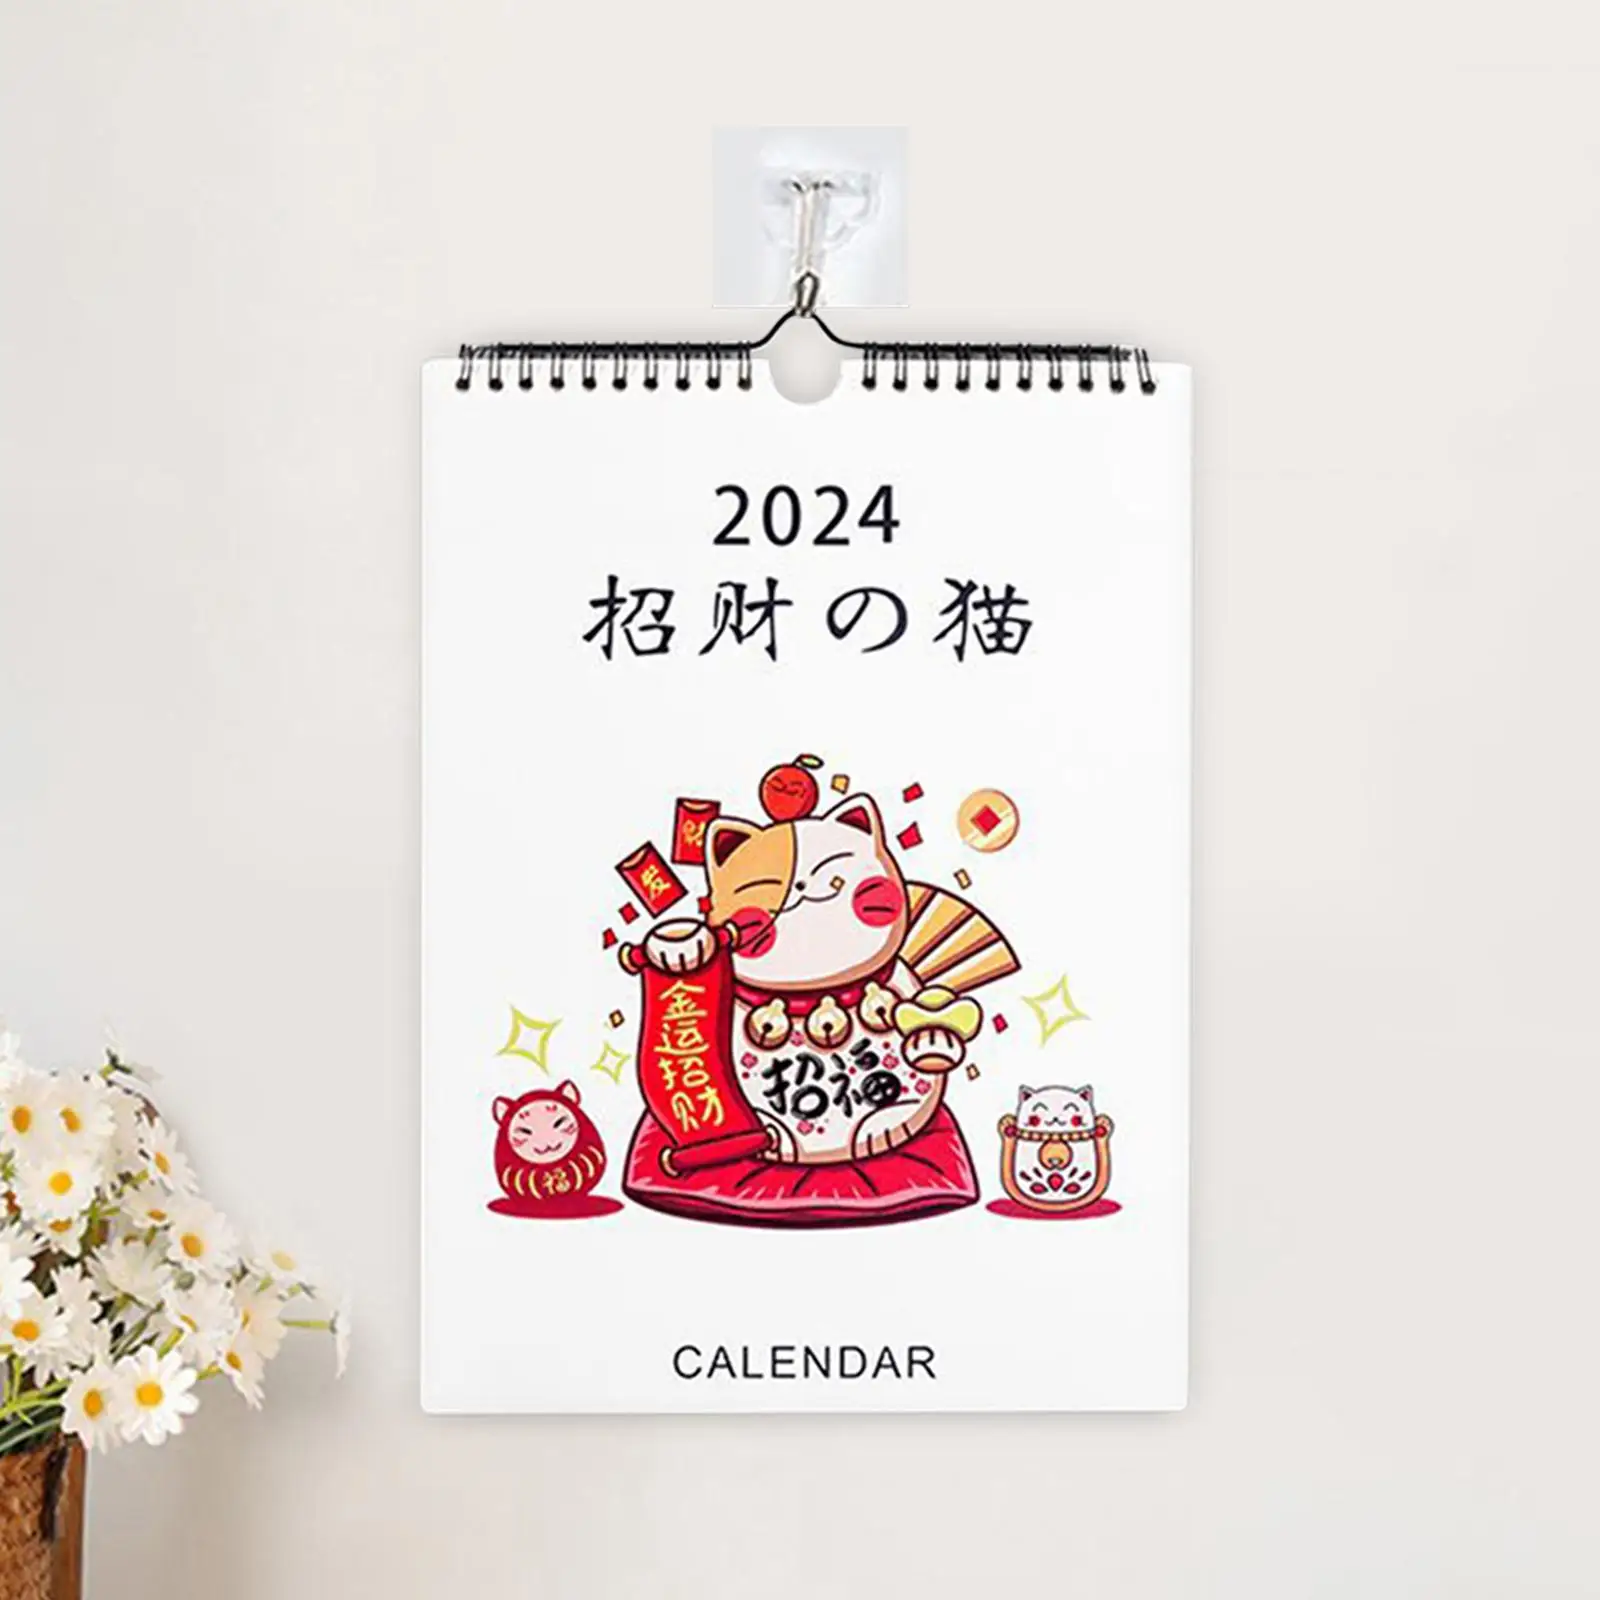 Coil Wall Calendar Sept 2023 - DEC 2024 Hanging Hanging Hook Monthly Calendar for Business New Year Holiday School Office